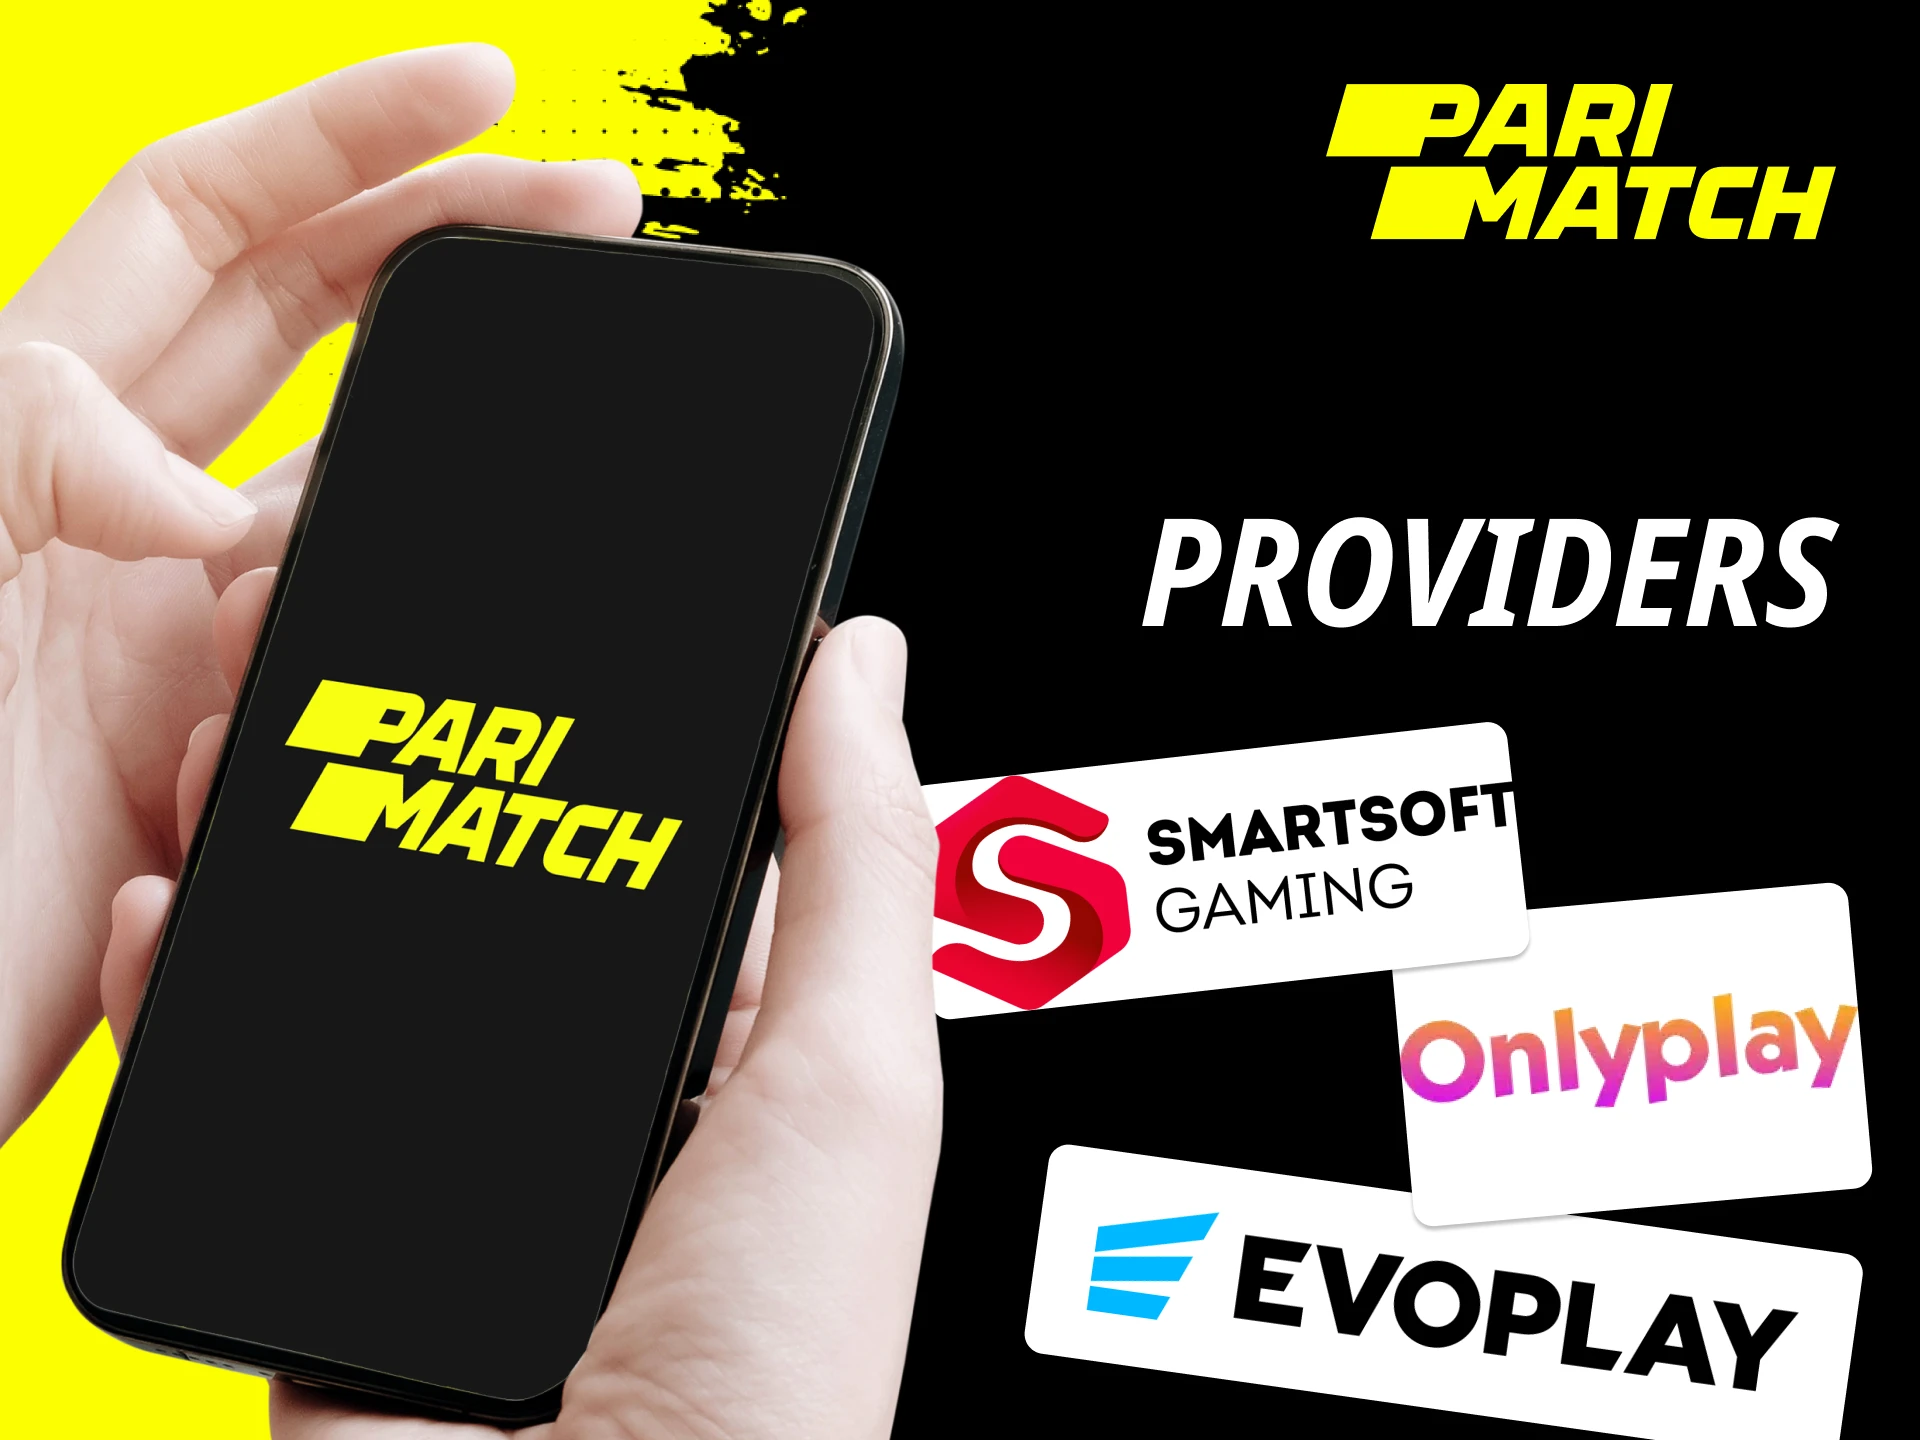 Who is the game supplier on the Parimatch online casino website.